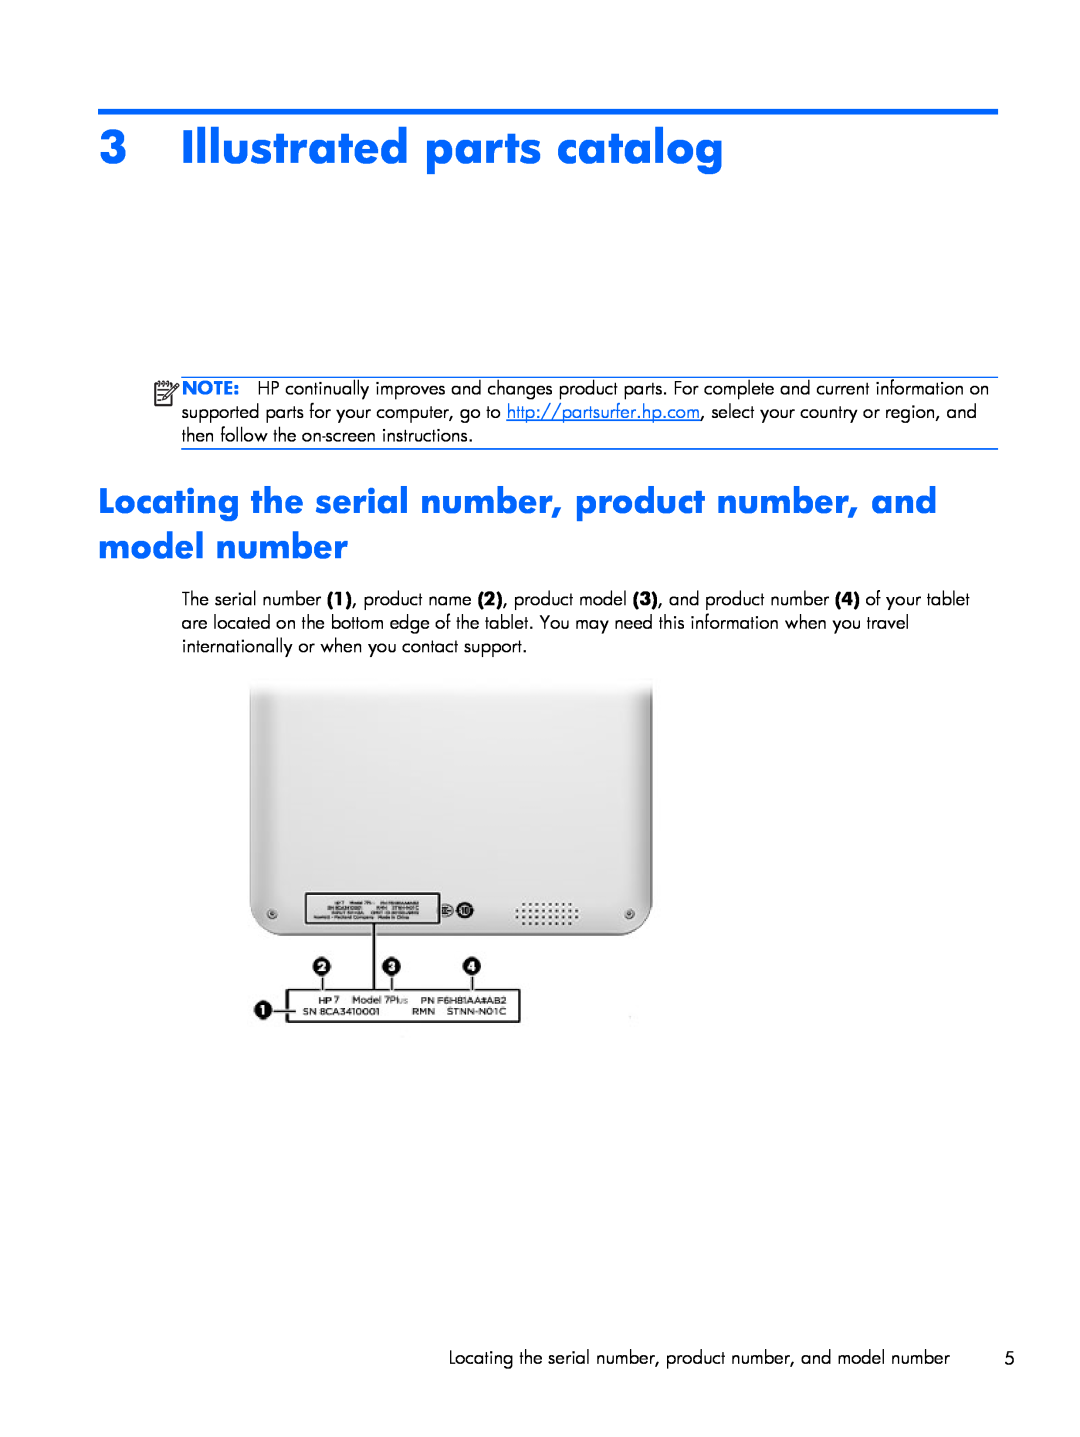 HP 7 Plus 1301, 7 Plus 1302us manual Illustrated parts catalog, Locating the serial number, product number, and model number 